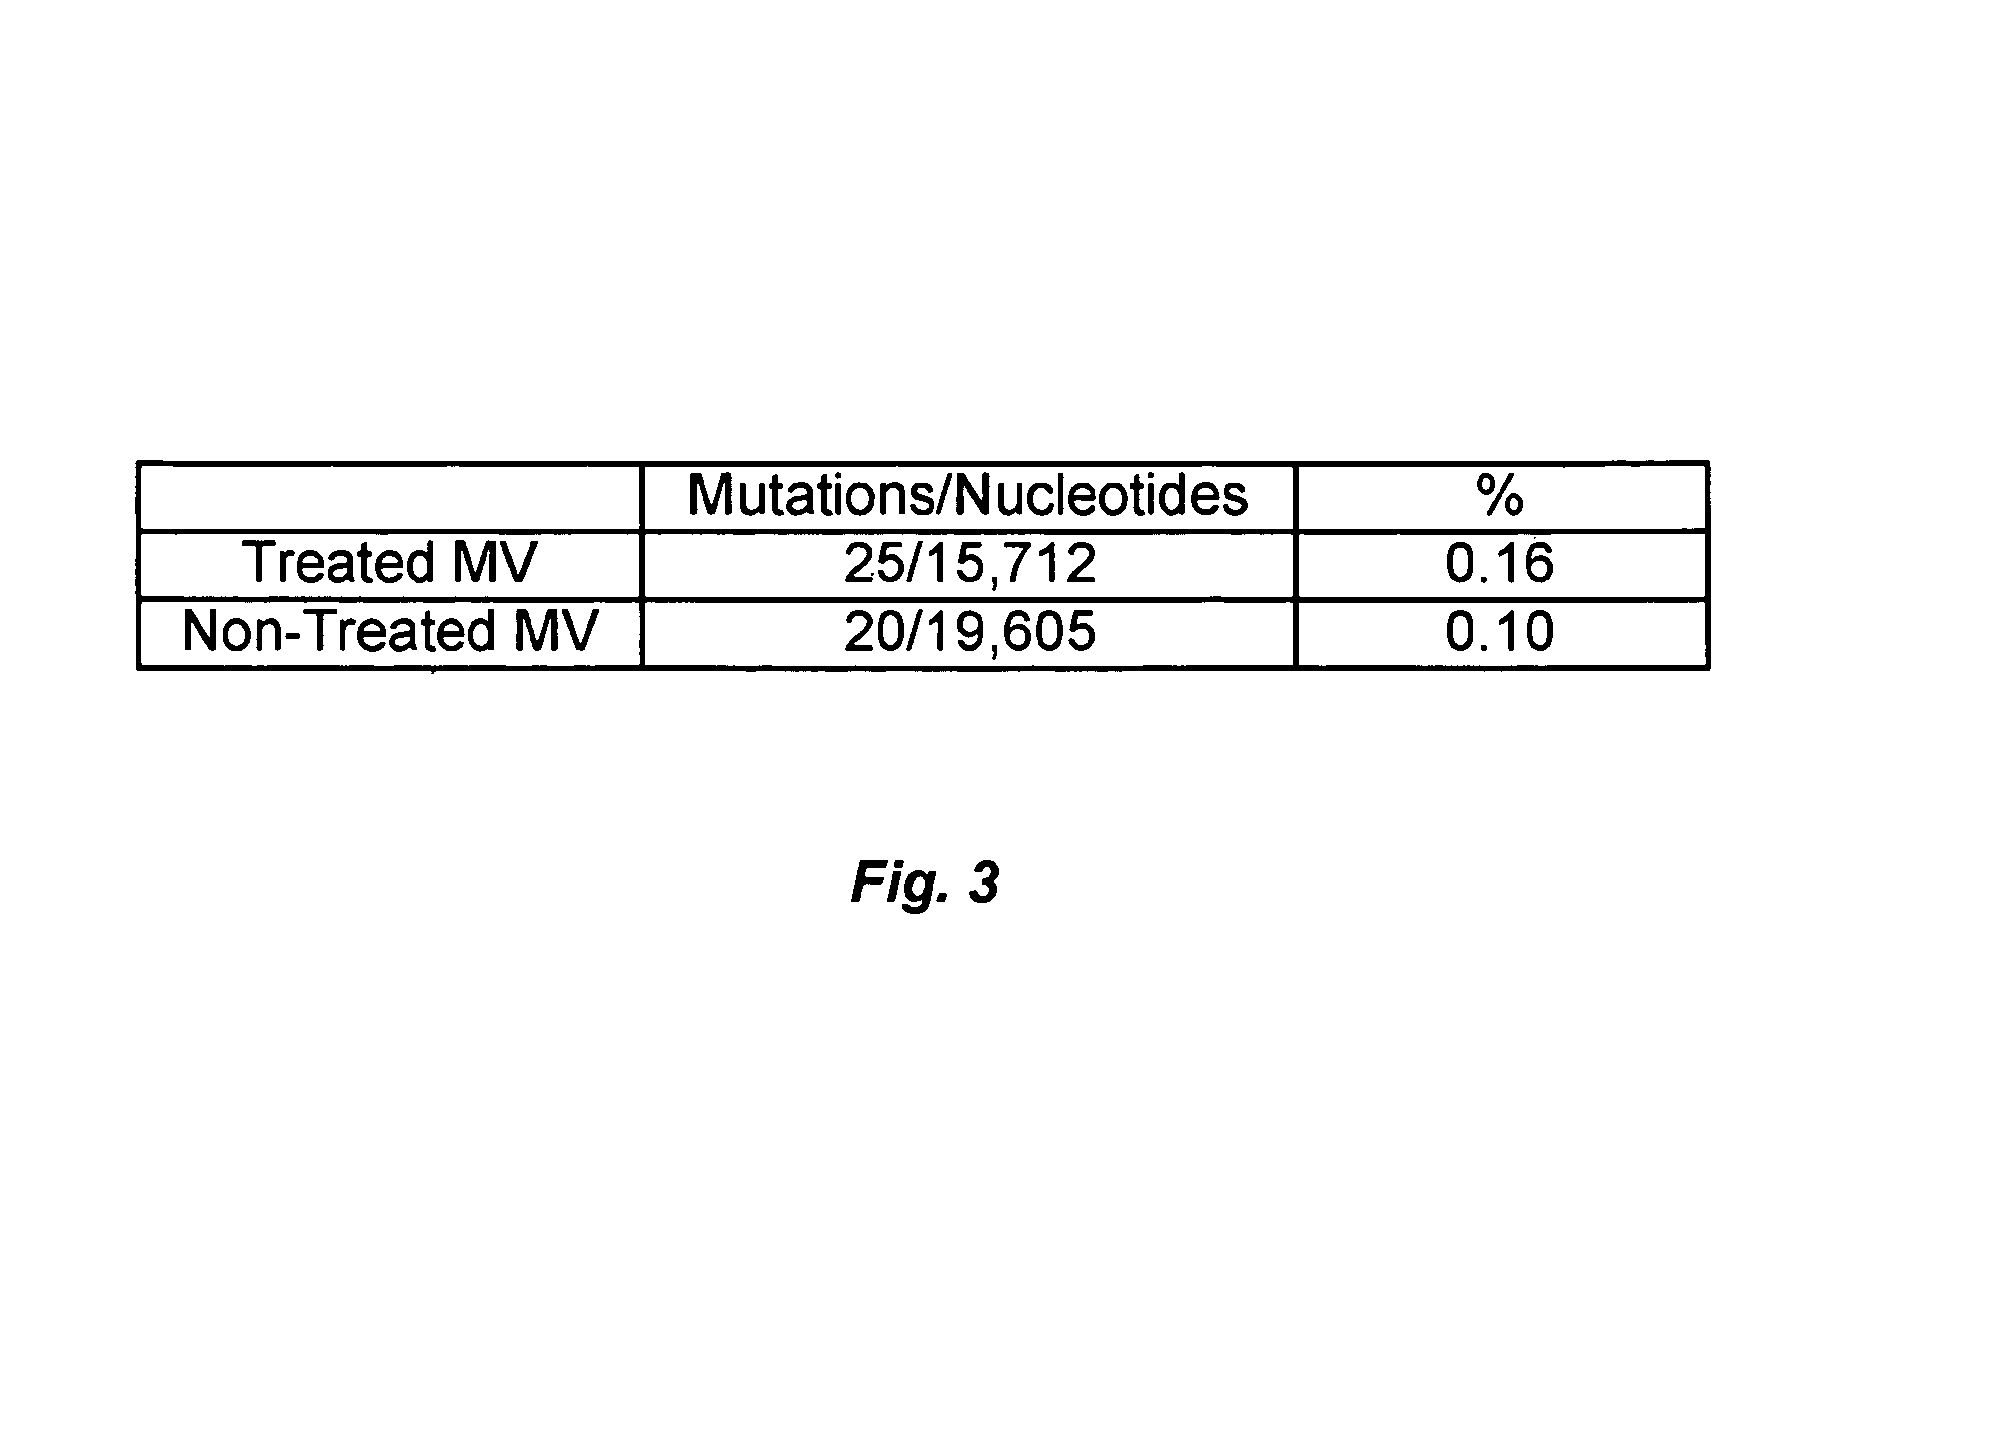 Mutagenic nucleoside analogs for the treatment of viral disease